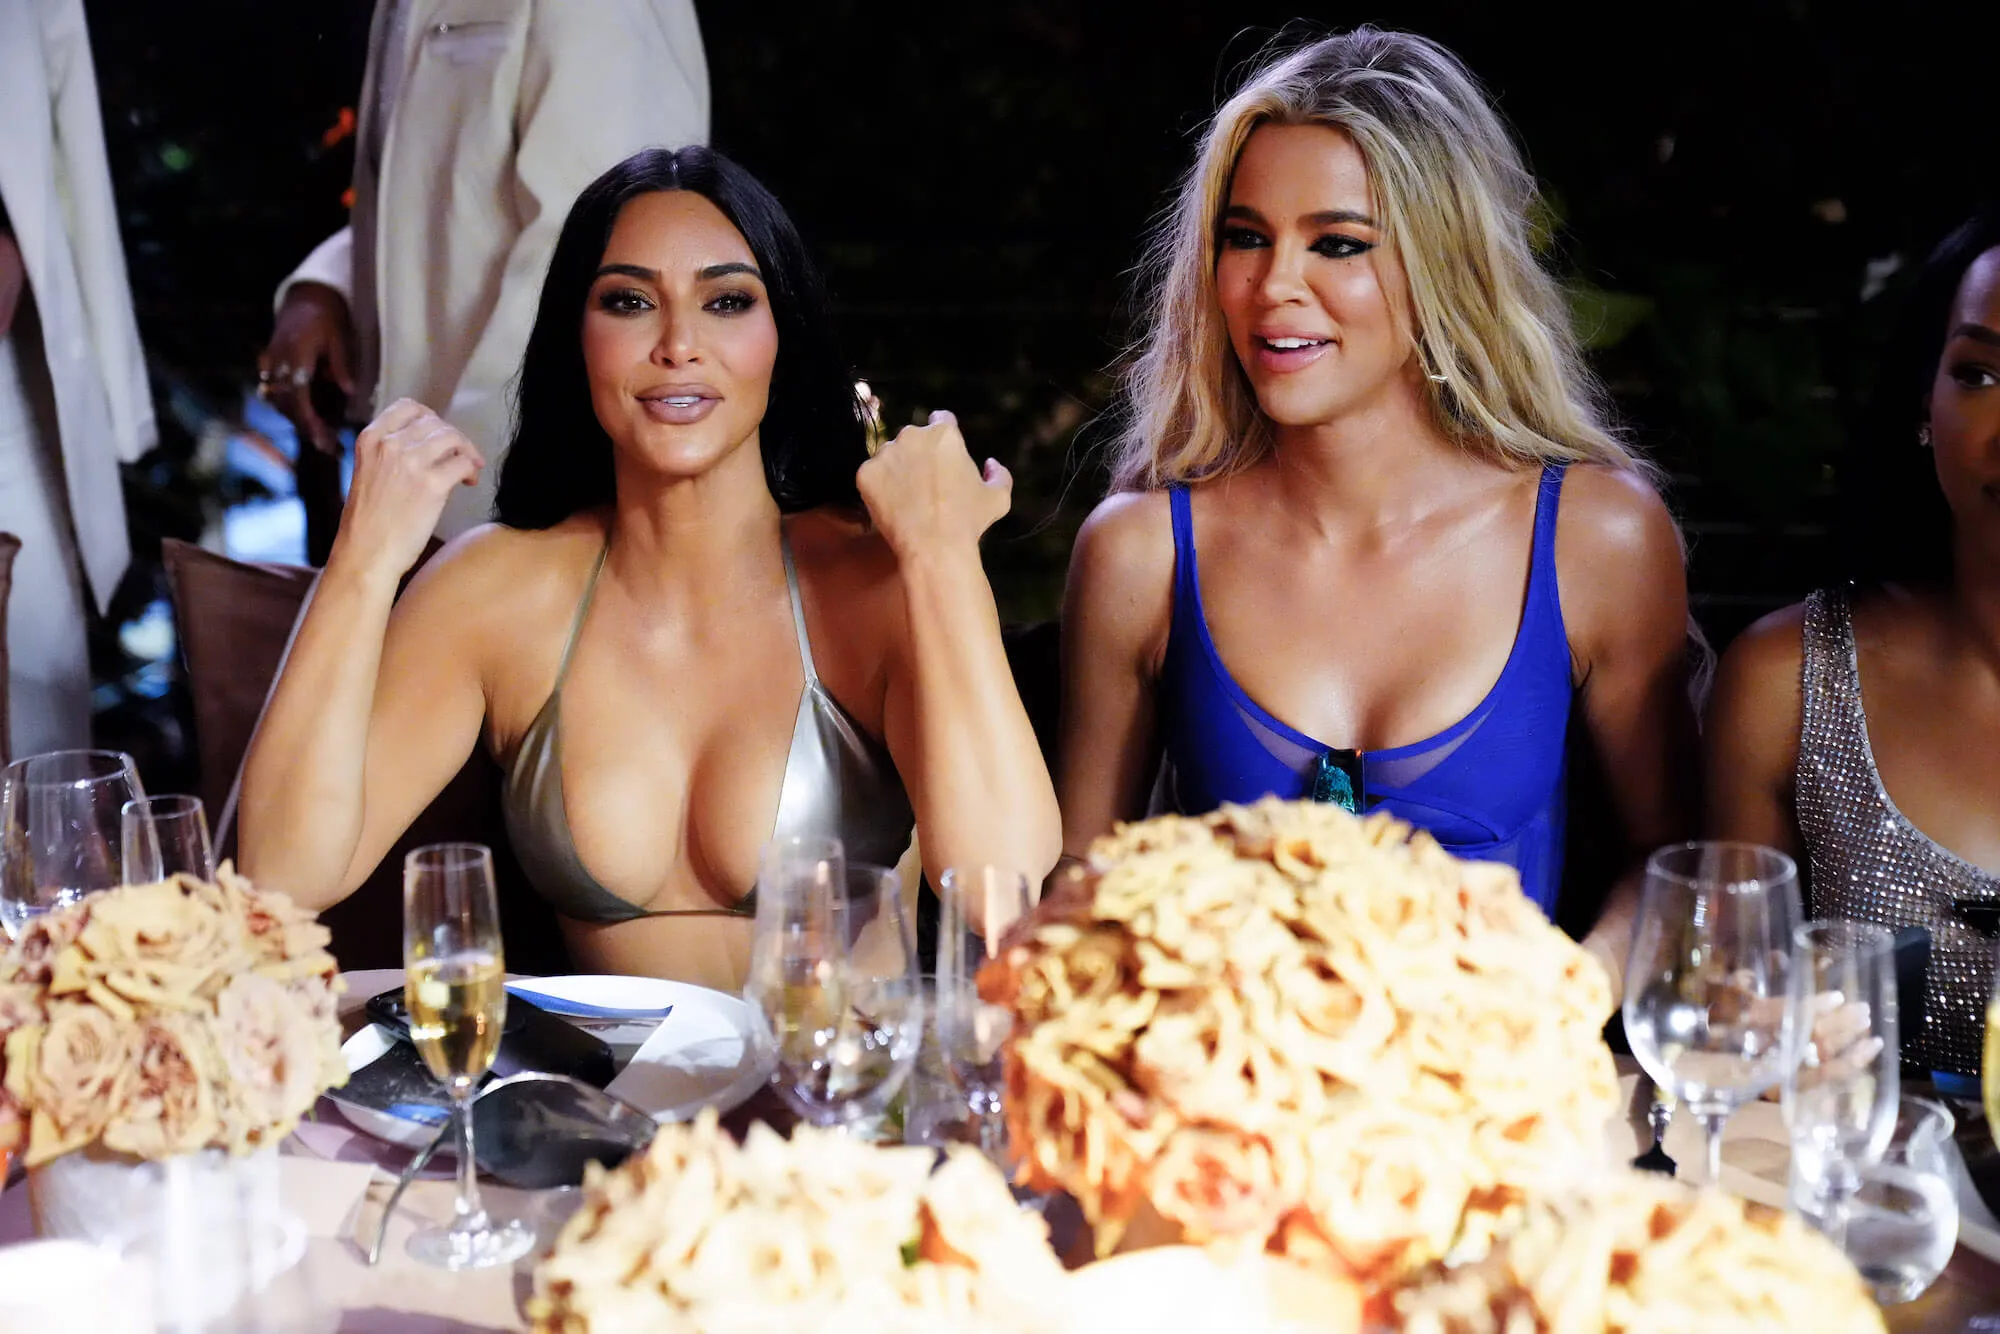 Kim and Khloé Kardashian smiling at a table together at the SKIMS SWIM Miami pop-up dinner at SWAN on March 19, 2022, in Miami, Florida